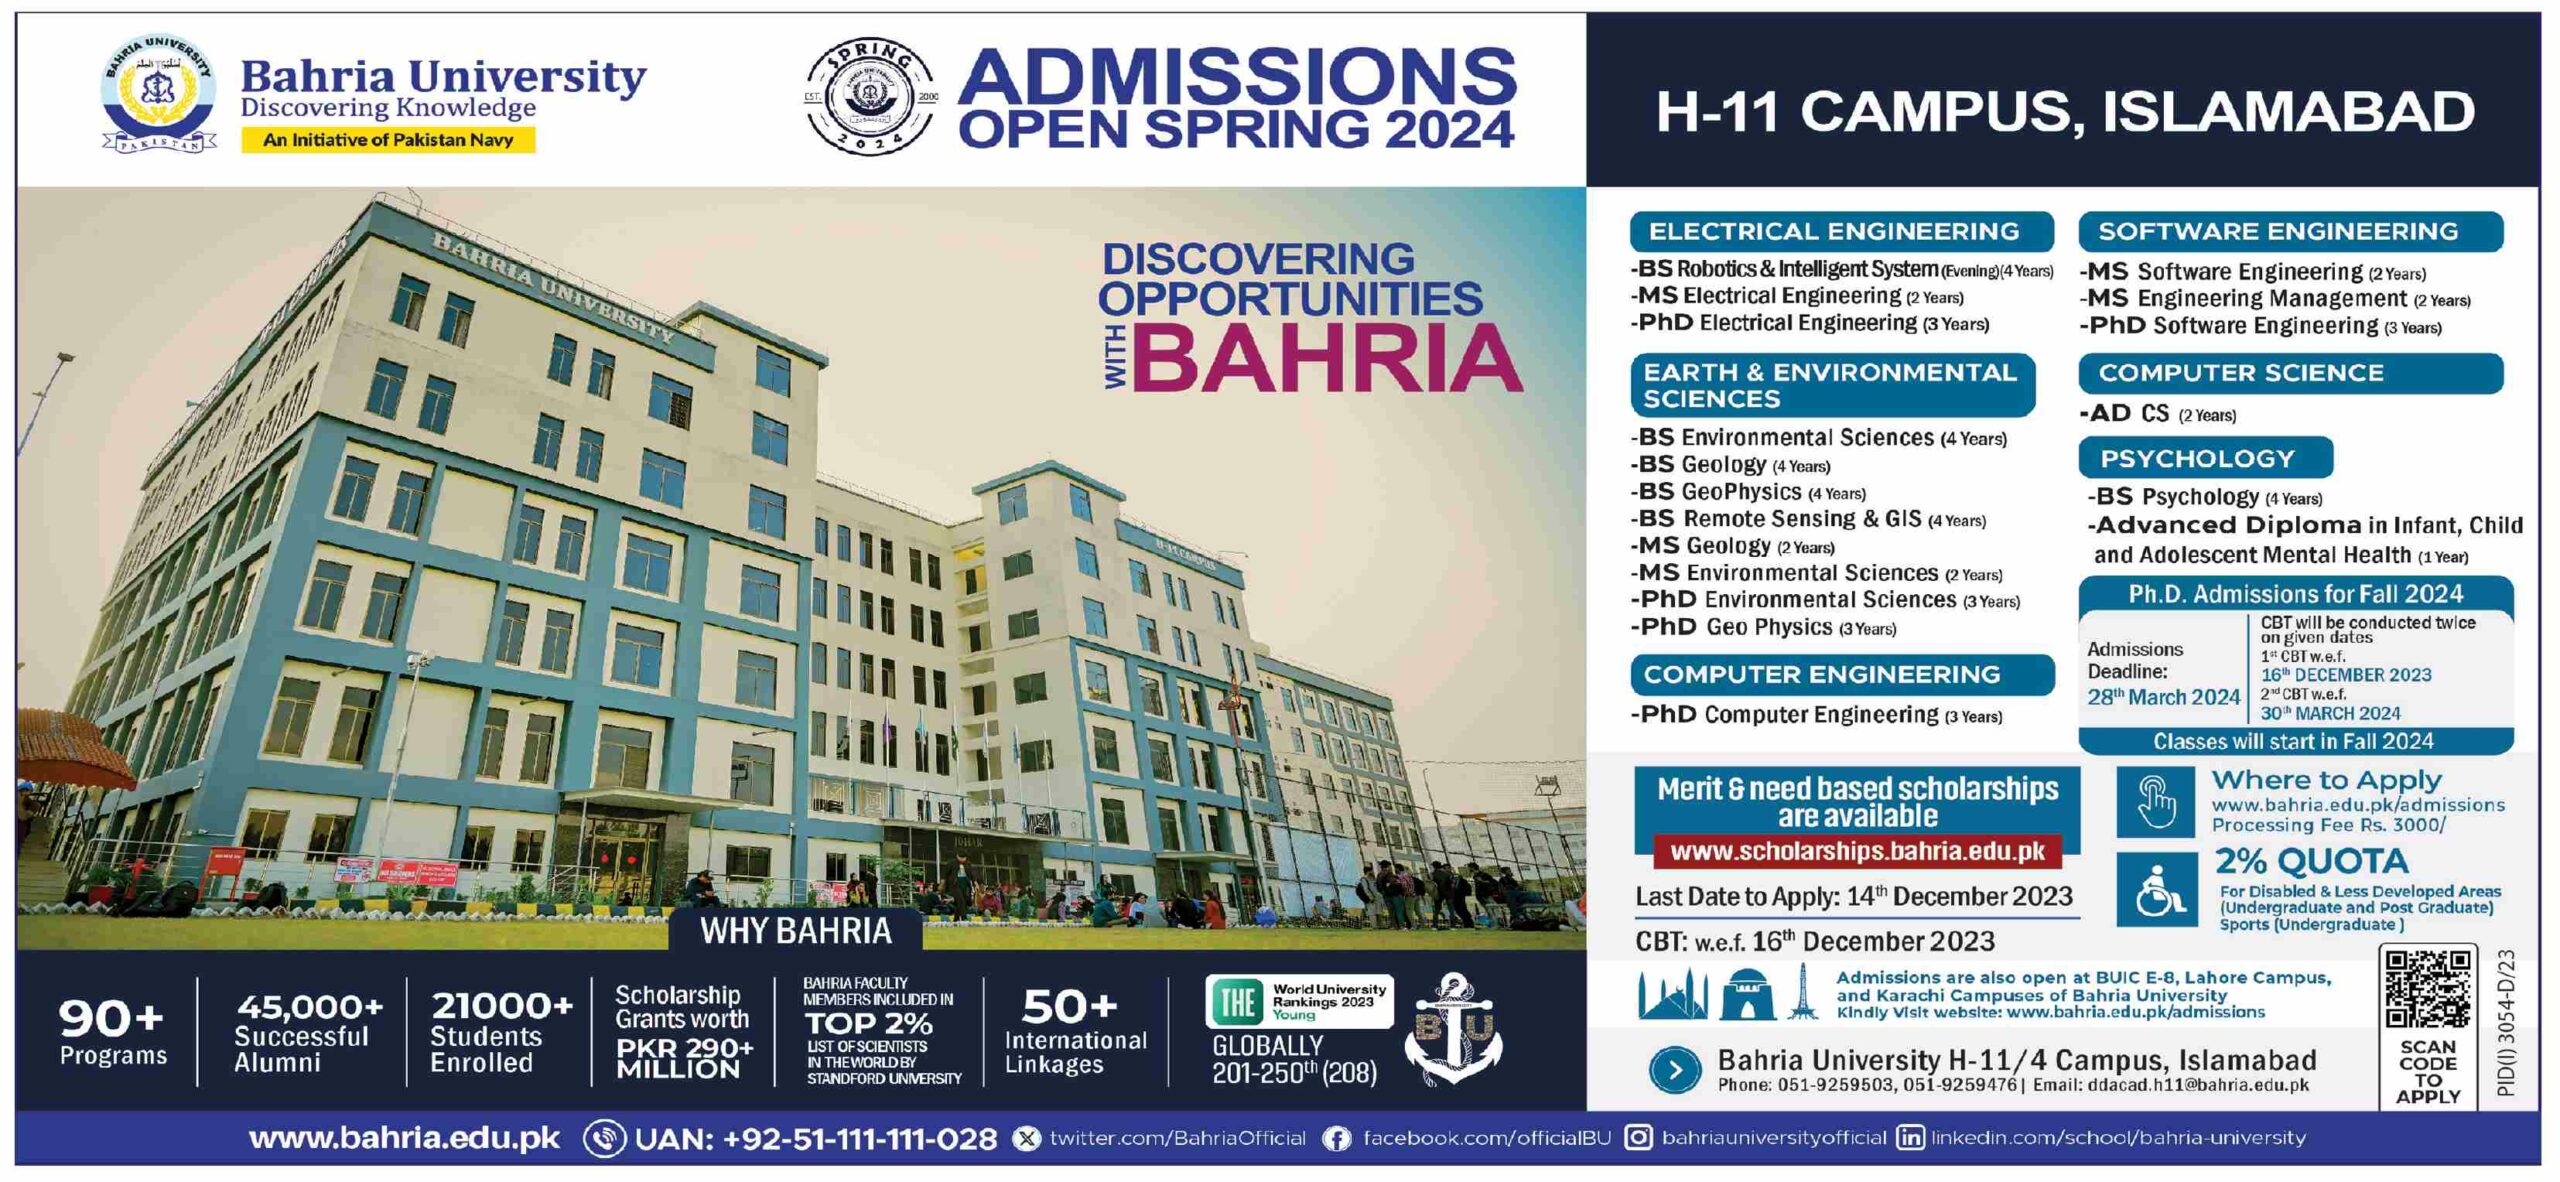 Bahria University H-11 Campus Islamabad Admissions Open Spring 2024